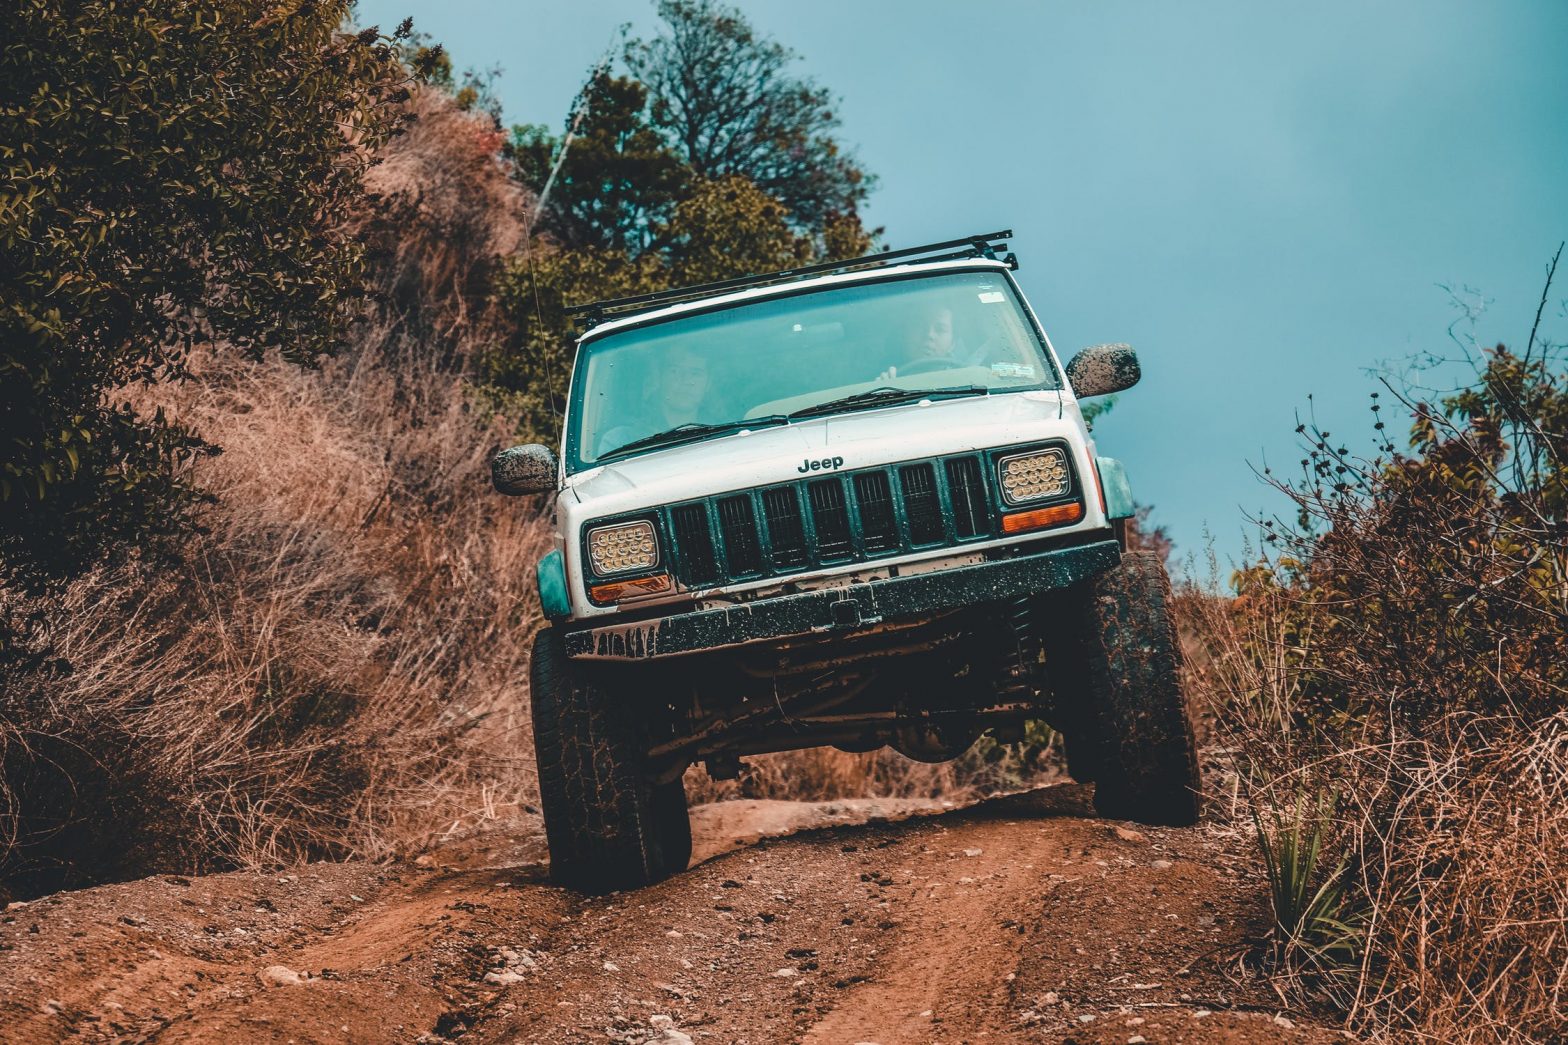 White jeep travelling downhill on a dirt off-road track